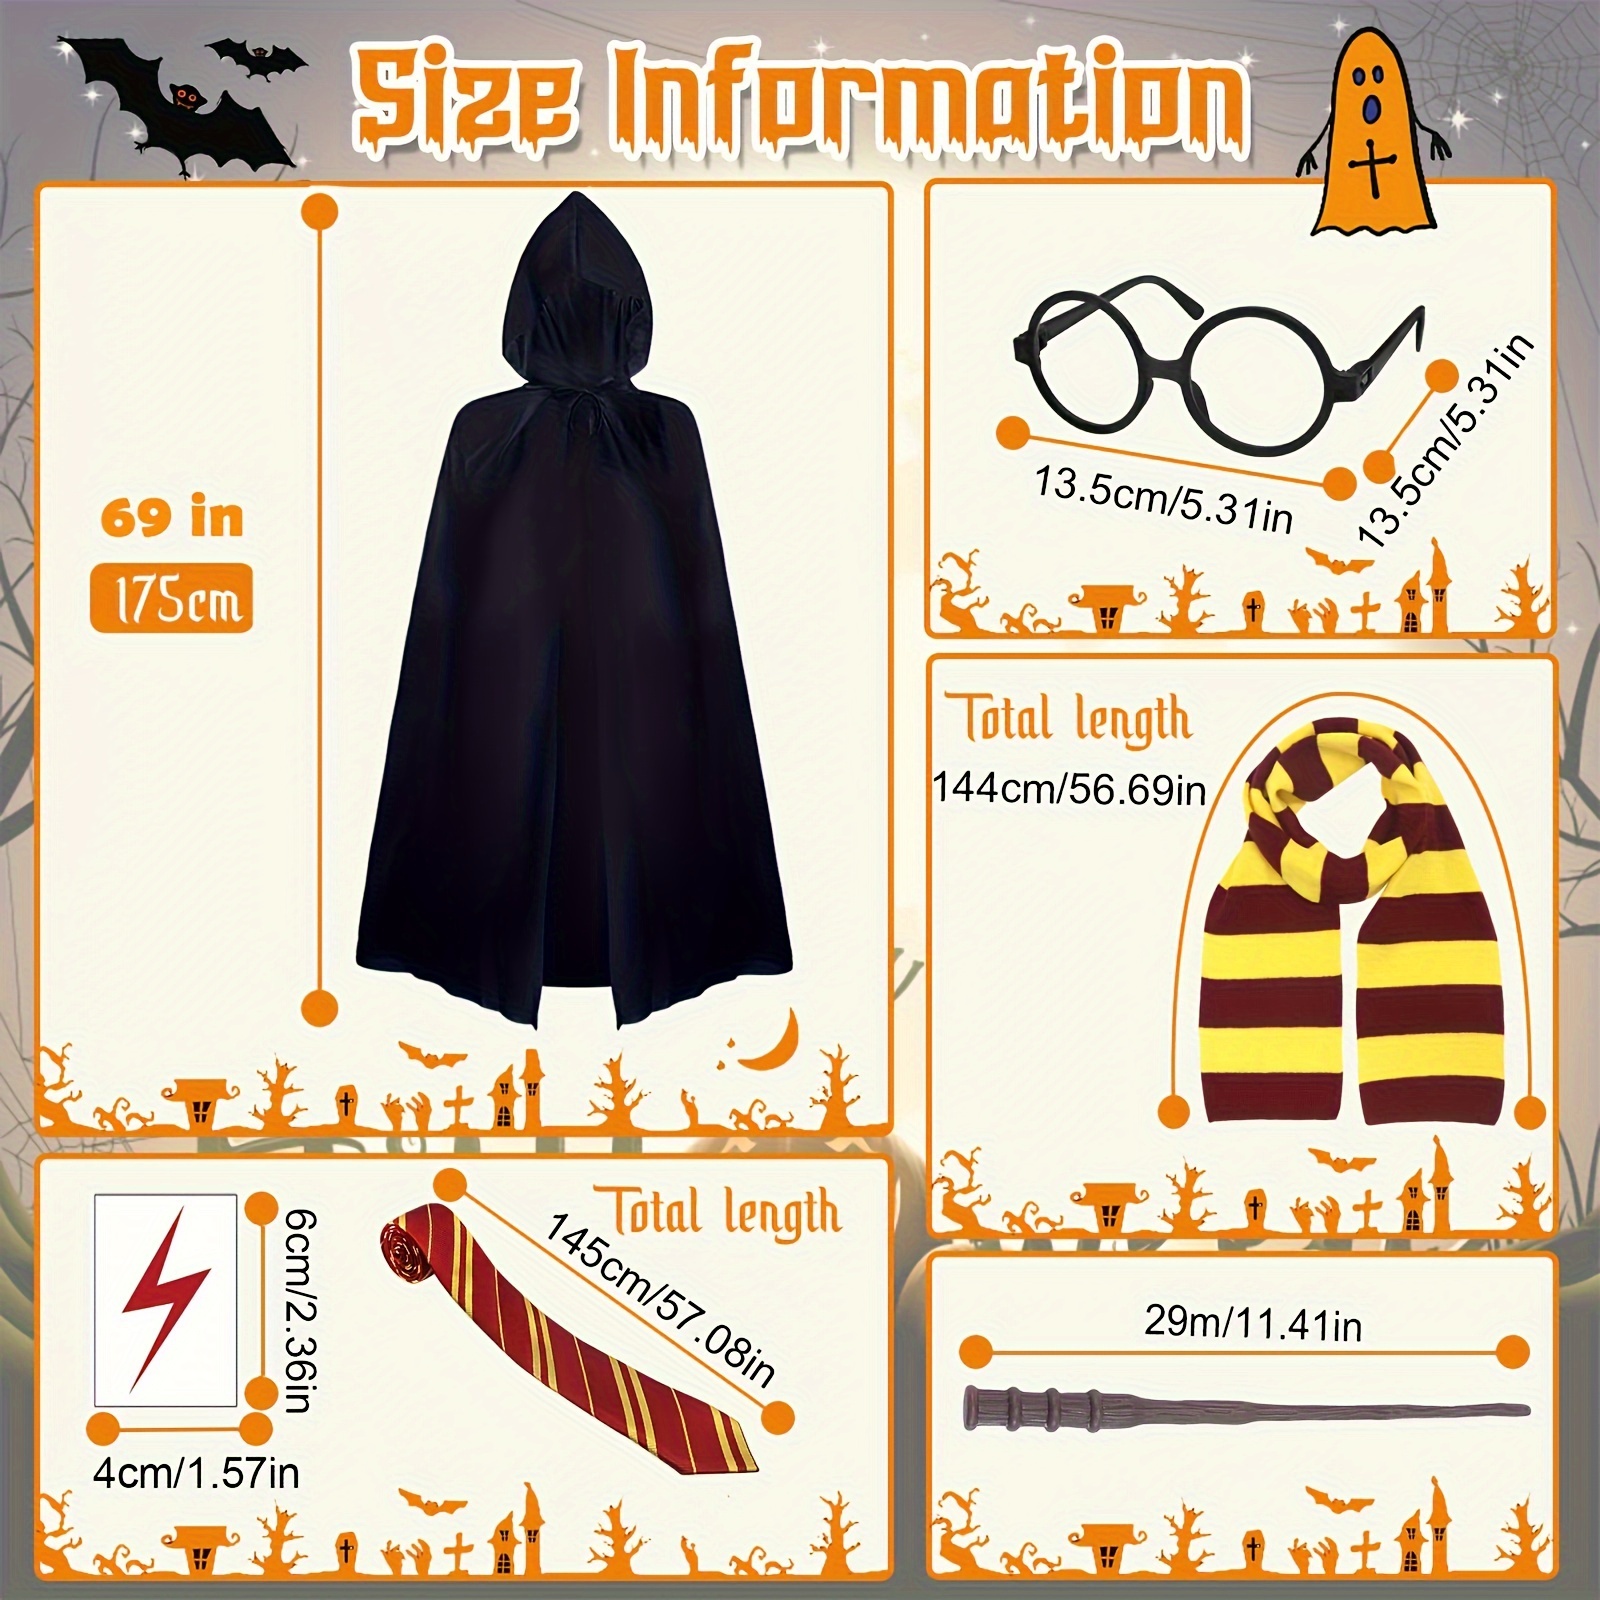 6pcs Wizard Harry Potter Cosplay Costume Set For Boys And Girls Harry Potter  Kids Hooded Robe